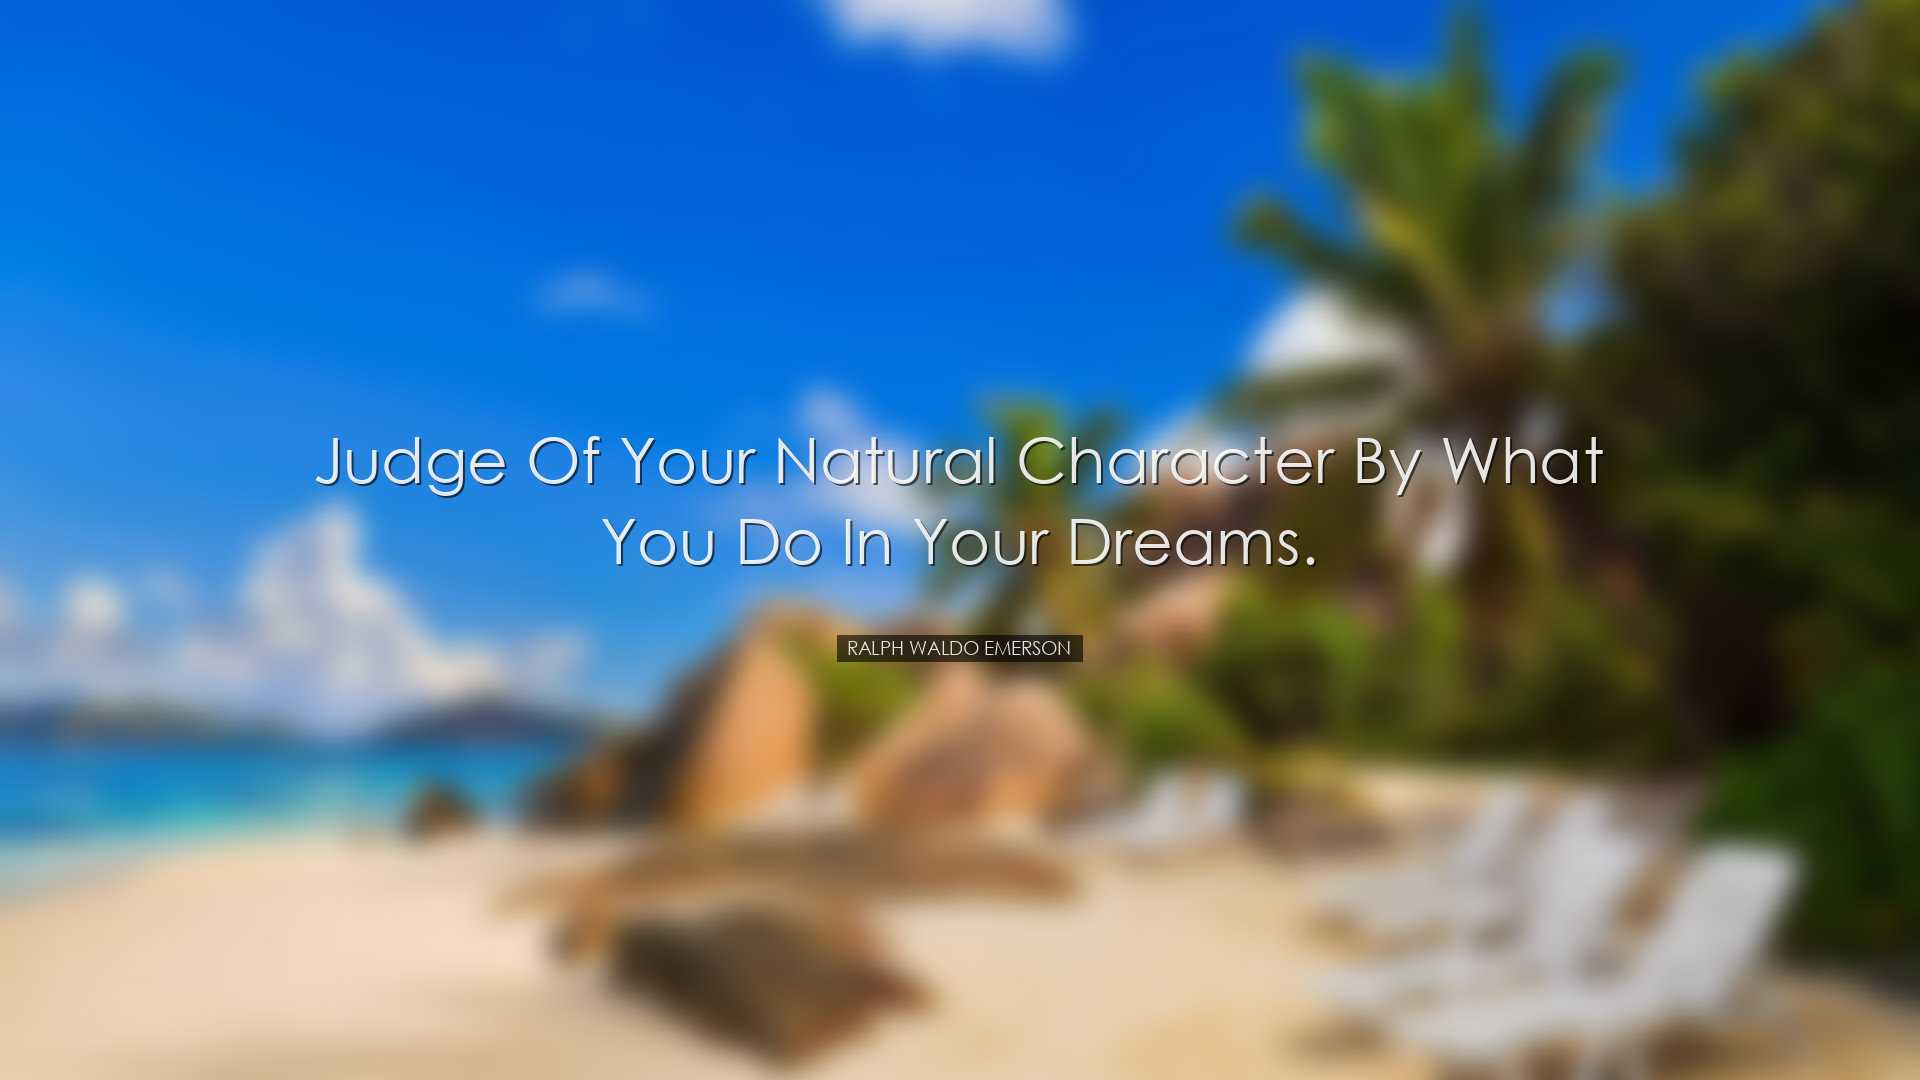 Judge of your natural character by what you do in your dreams. - R